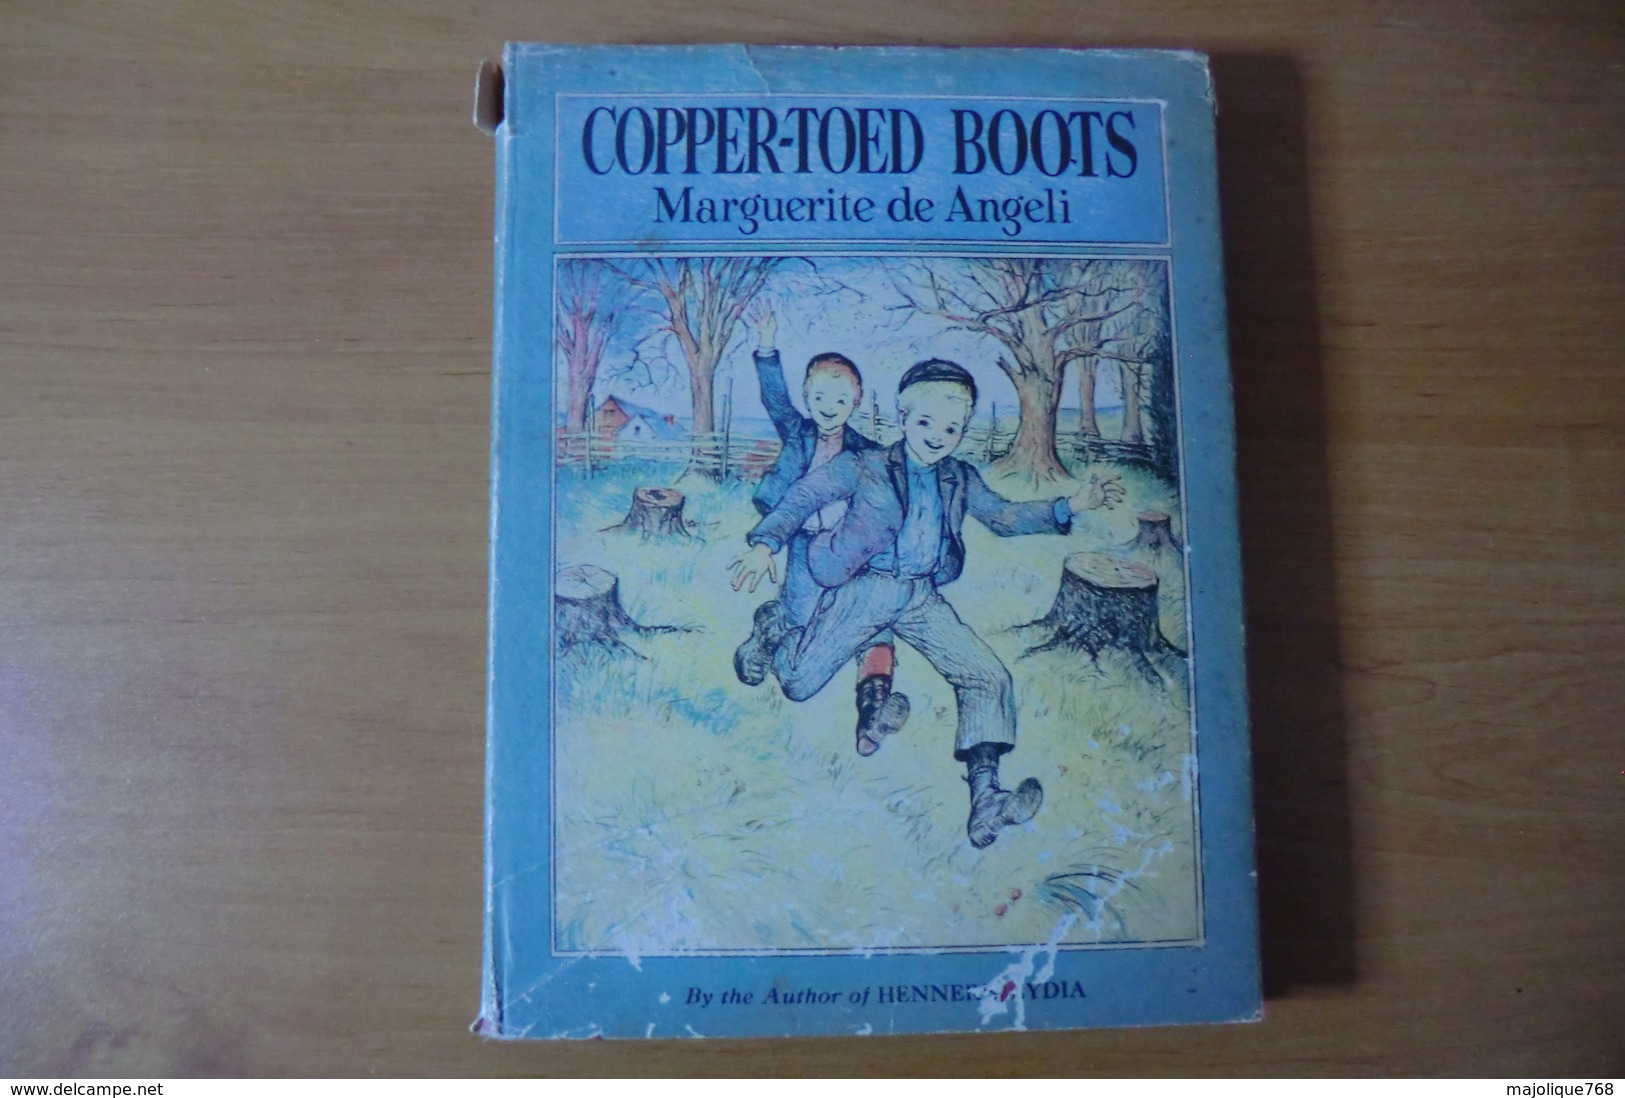 Copper-Toed Boots - Marguerite De Angeli - By The Author Of Henner's Lydia - 1938 -avec Sa Jaquette - Fiction